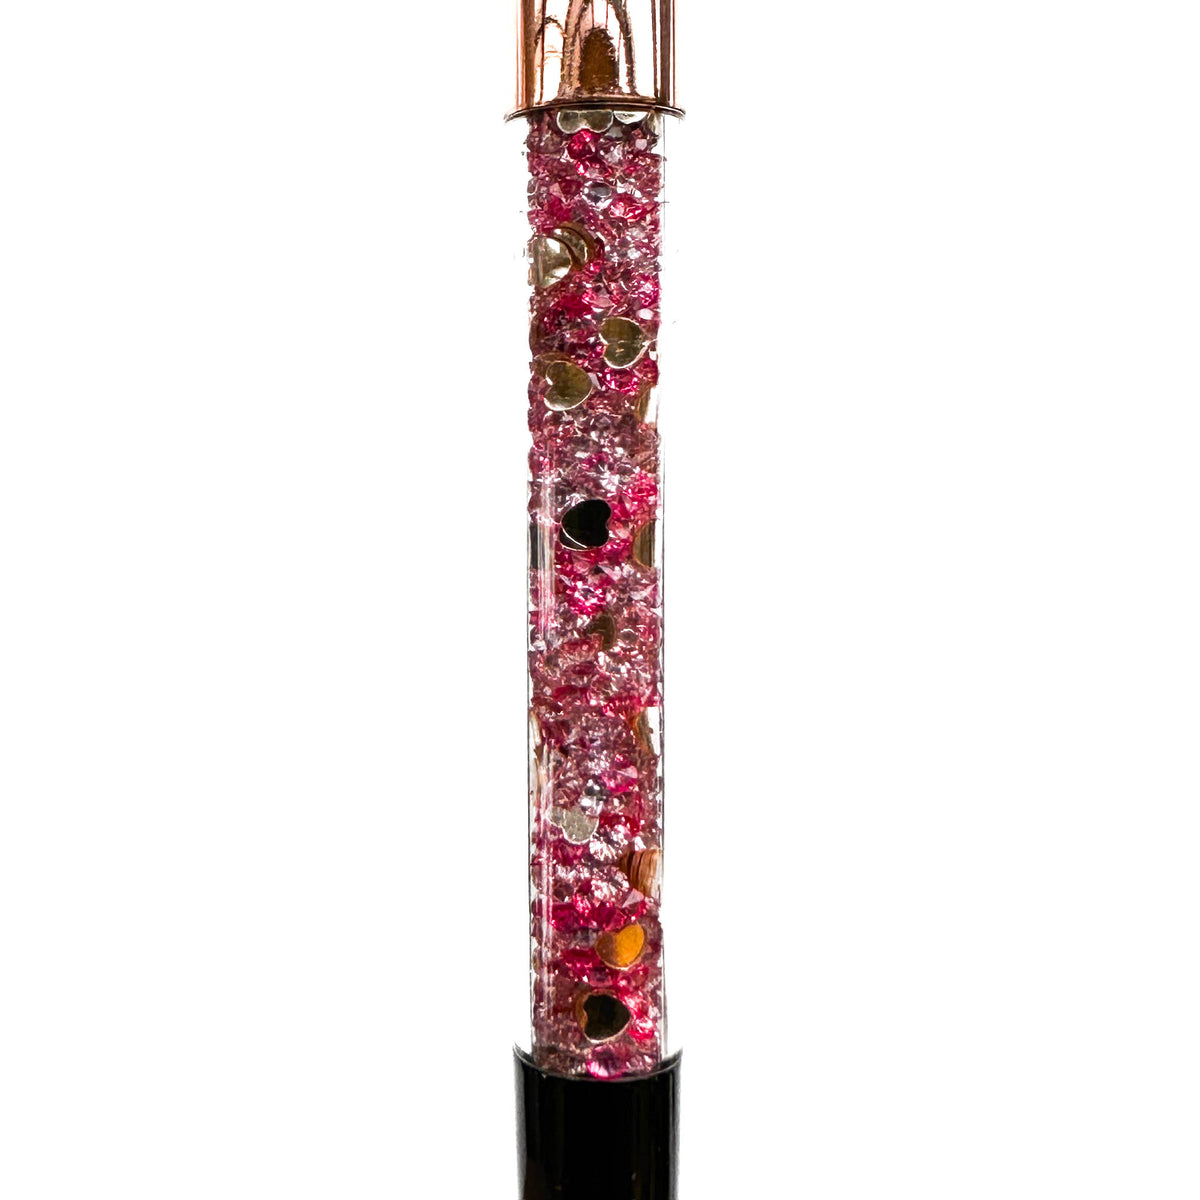 Heart To Heart Crystal VBPen | limited pen